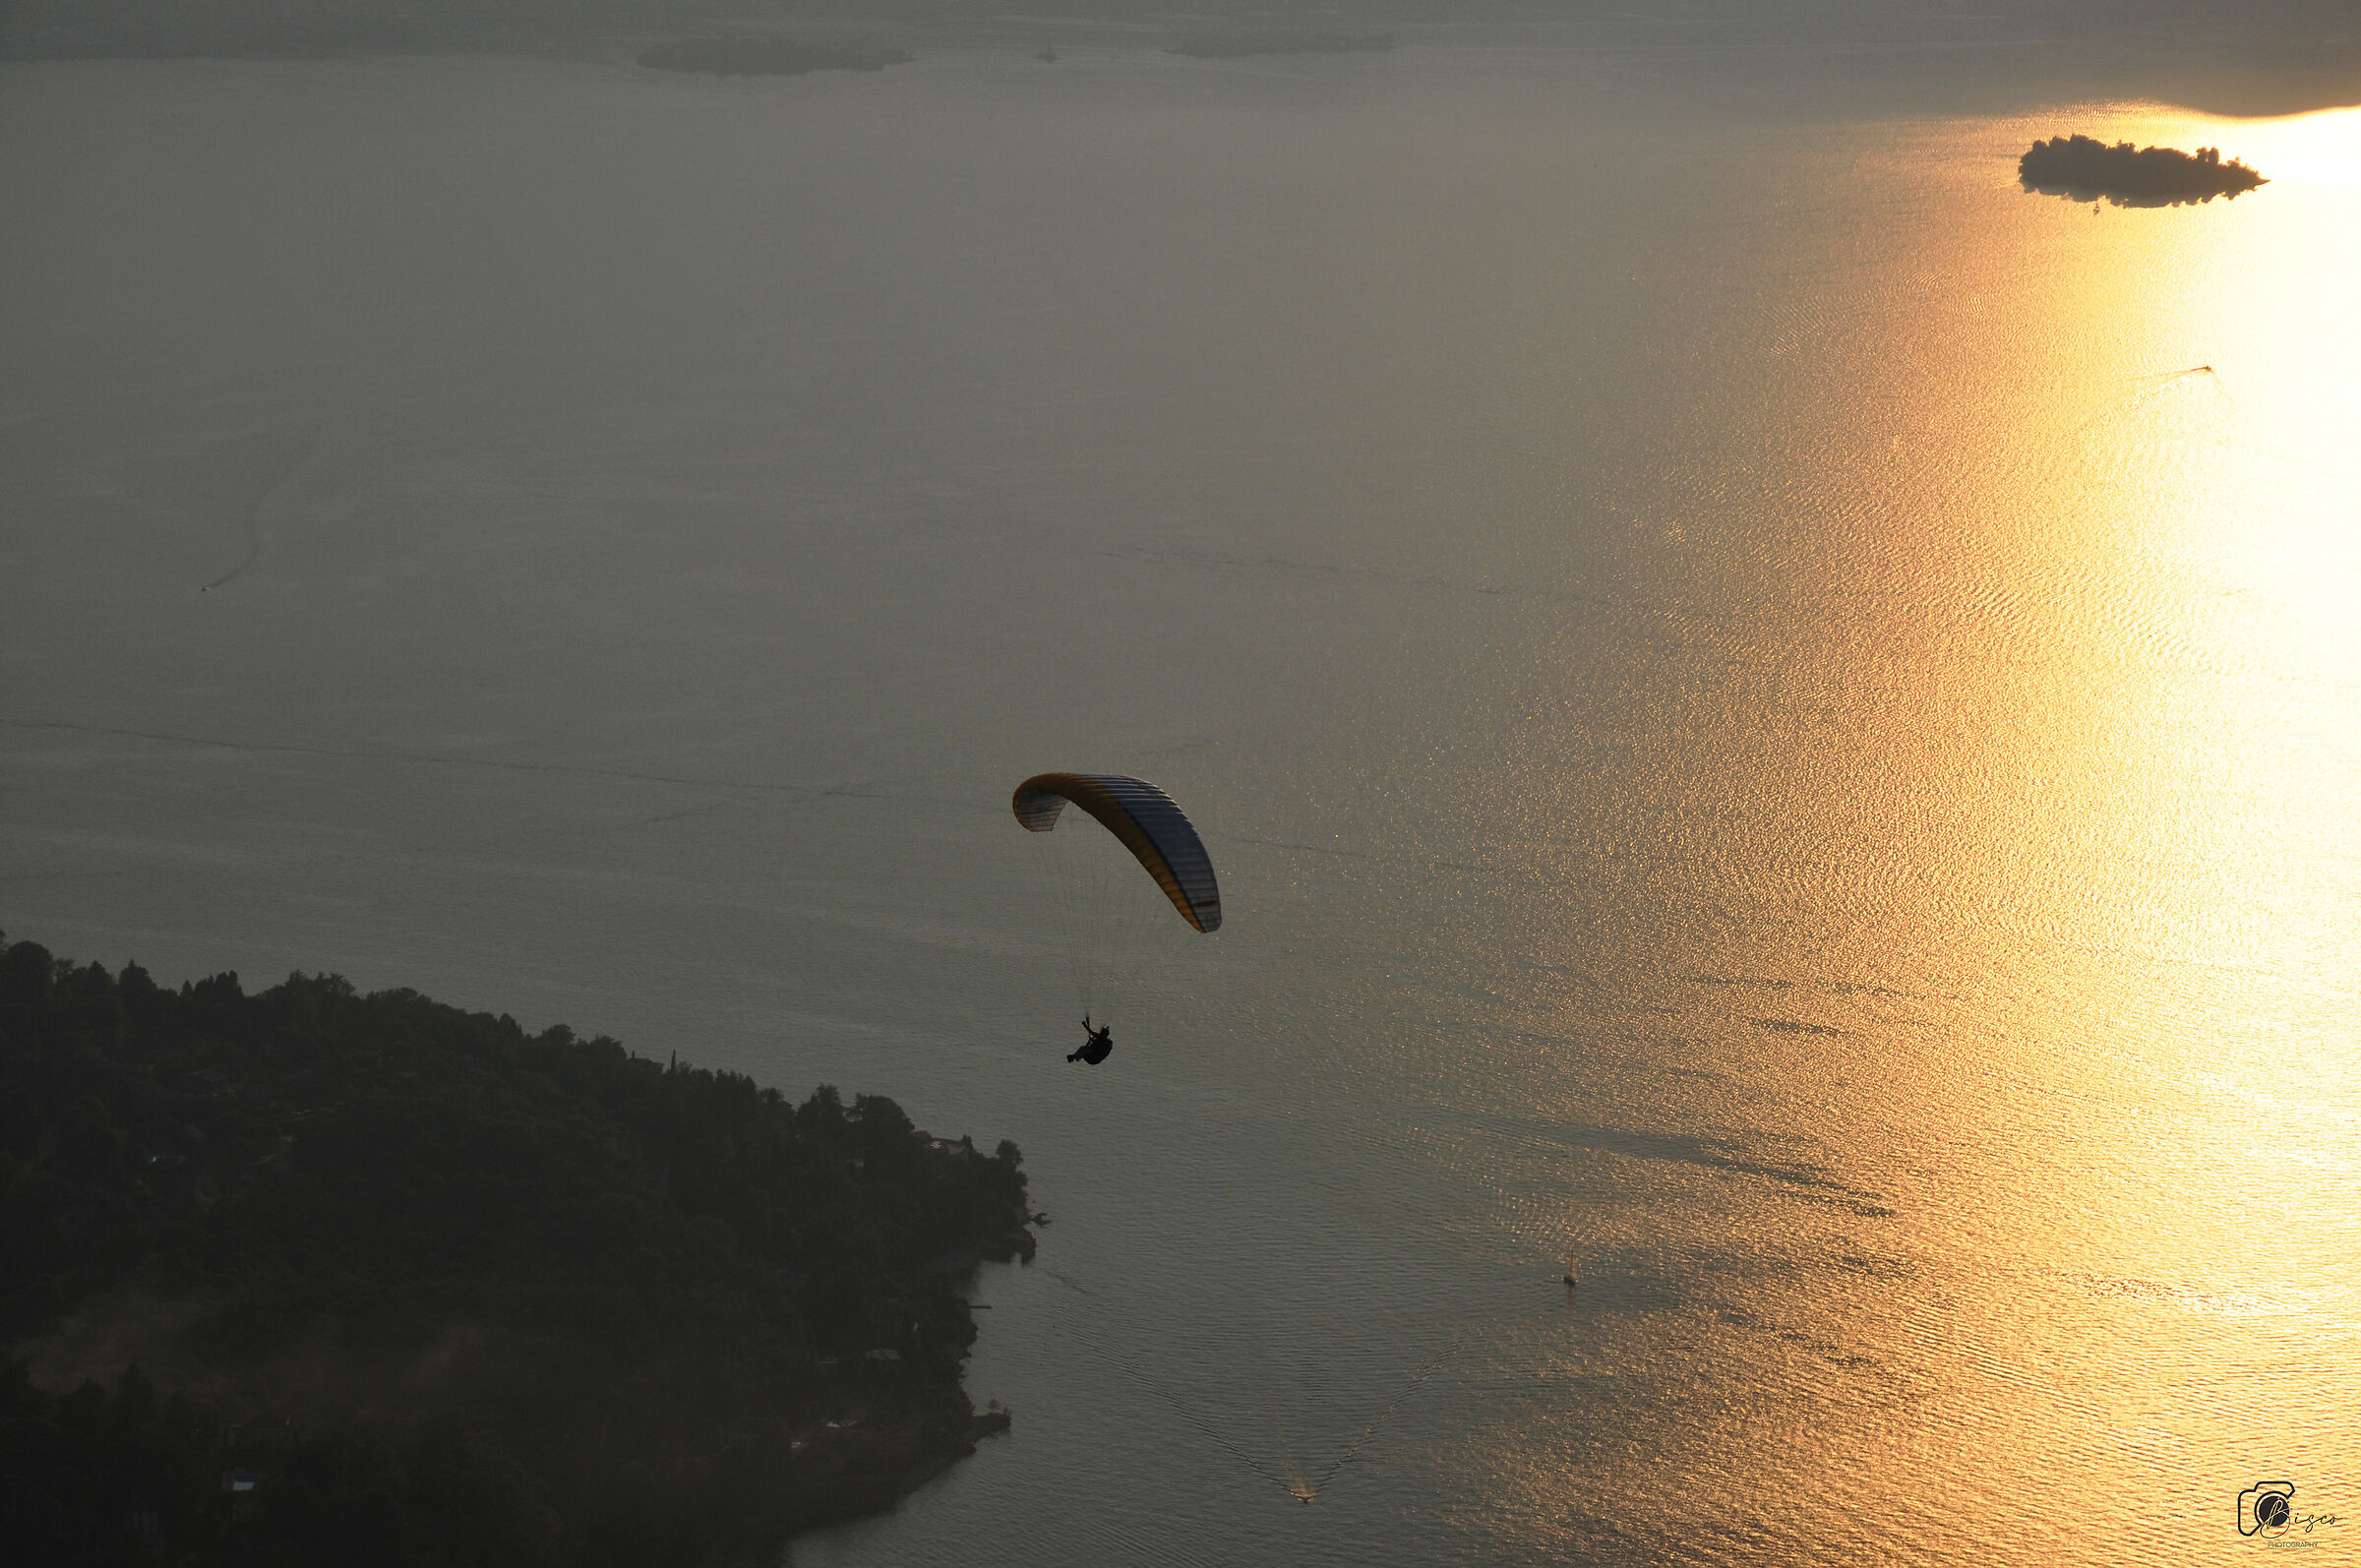 Flying over Lake Maggiore...